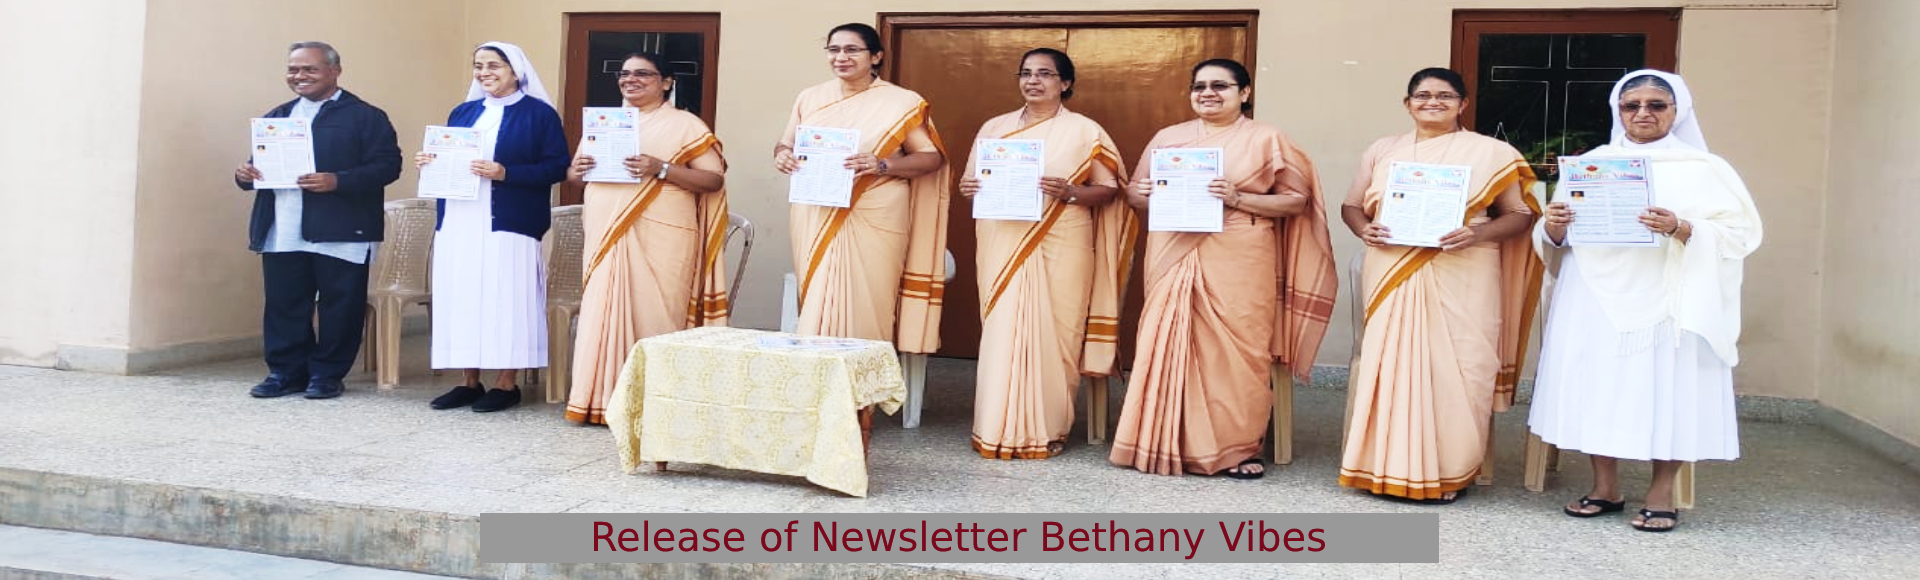 Release of Newsletter Bethany Vibes